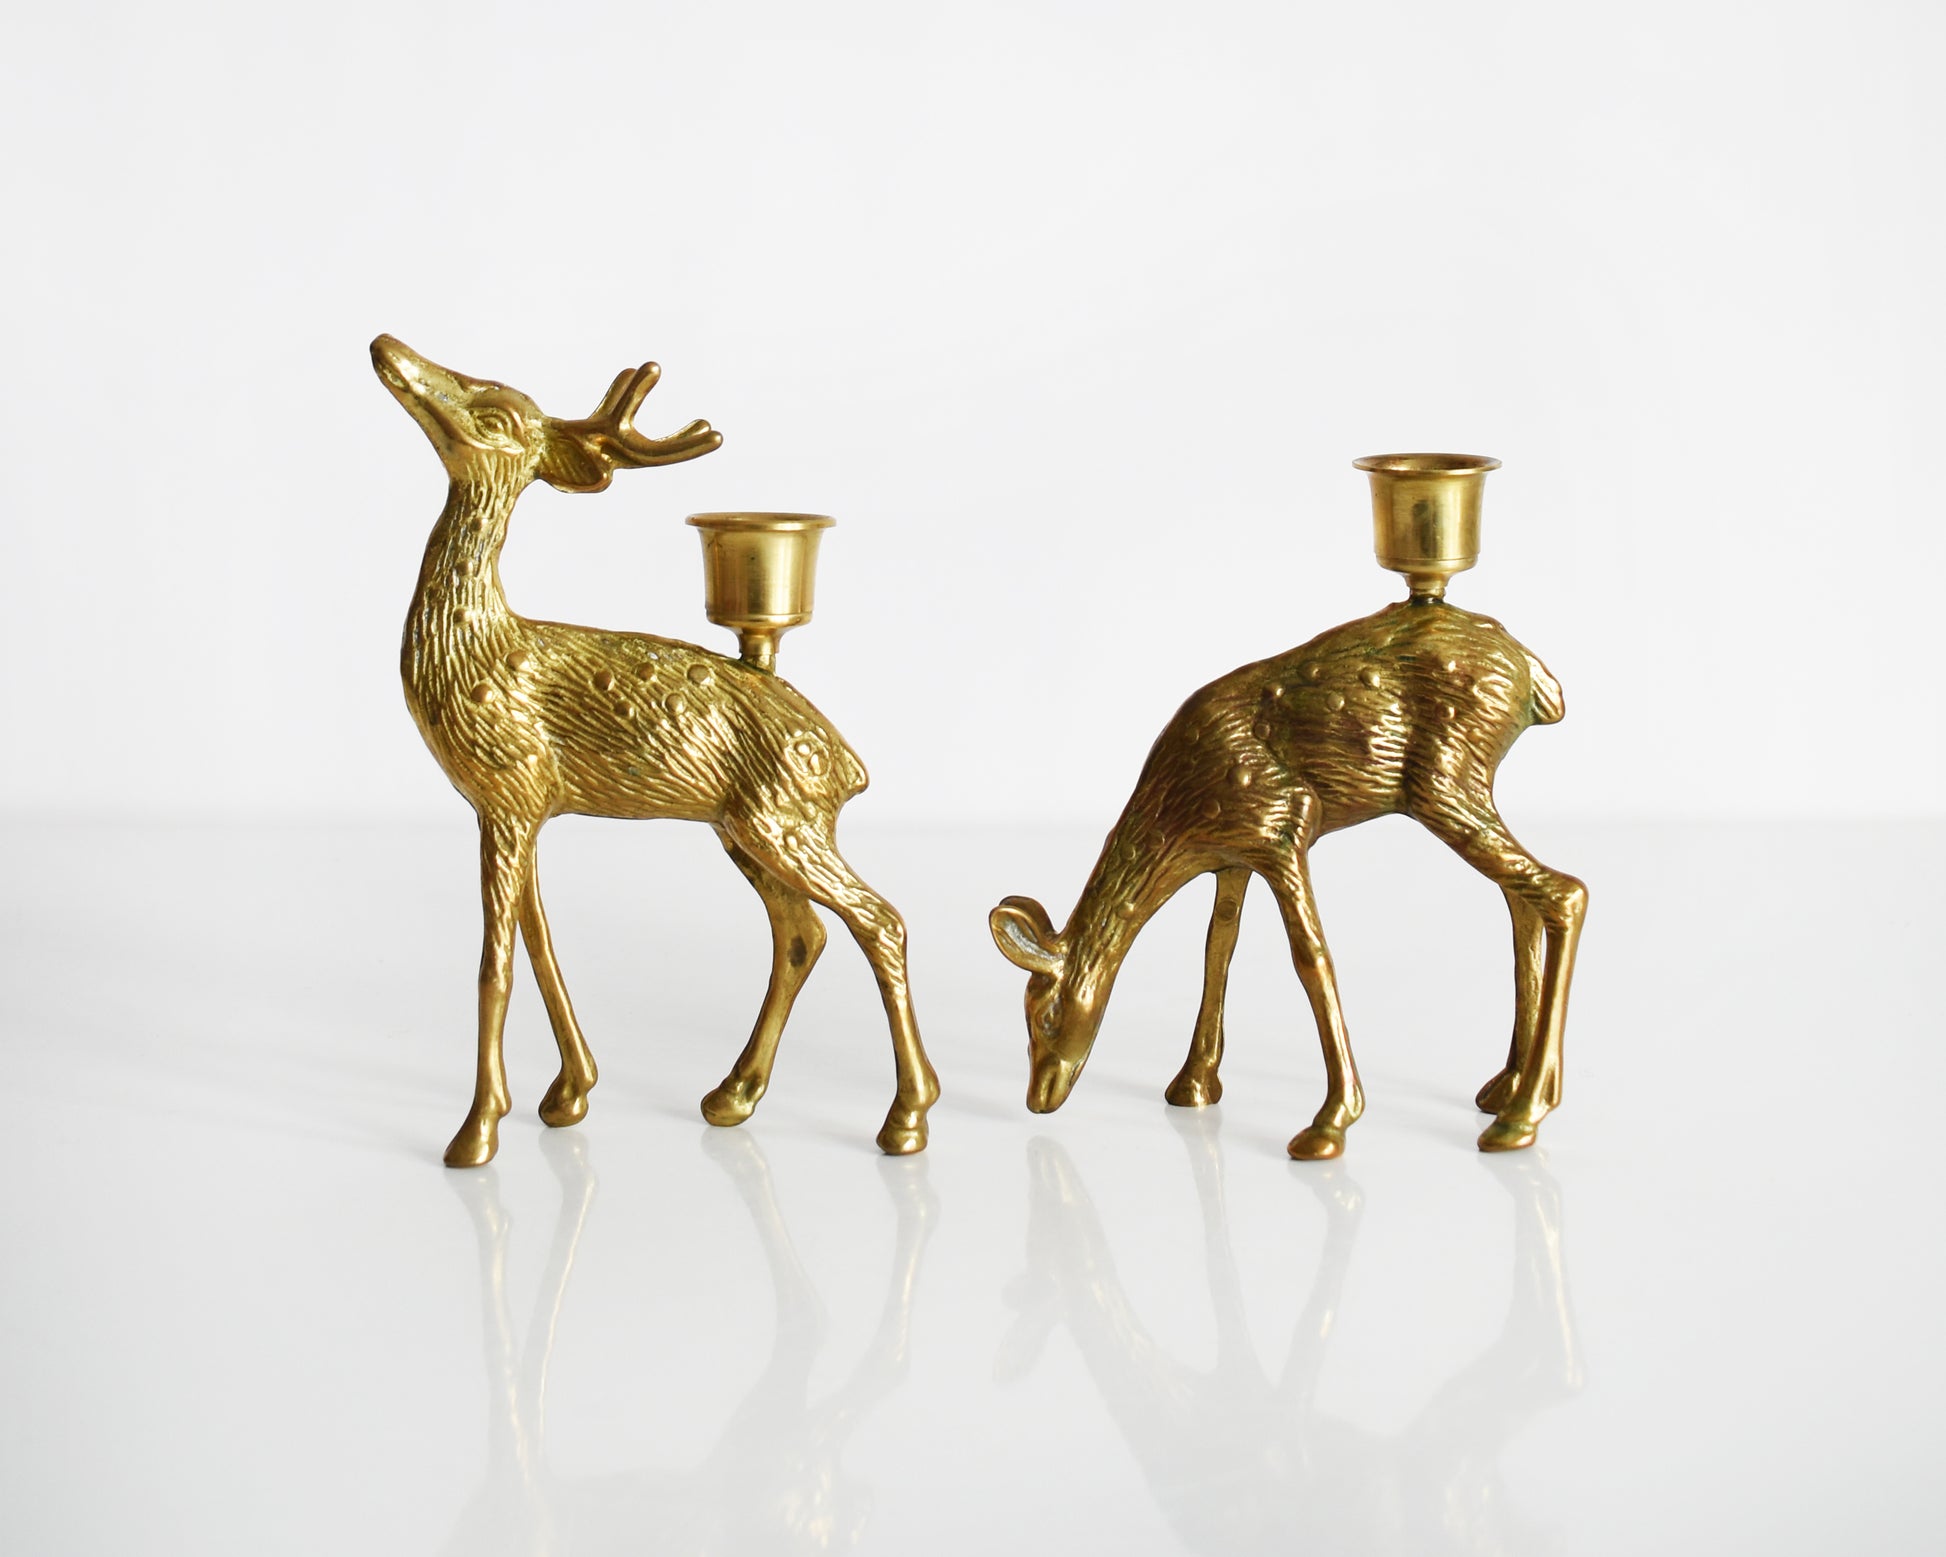 Vintage pair of brass deer figurine candle holders. The buck is standing upright displaying his antlers and the doe is grazing on the ground.